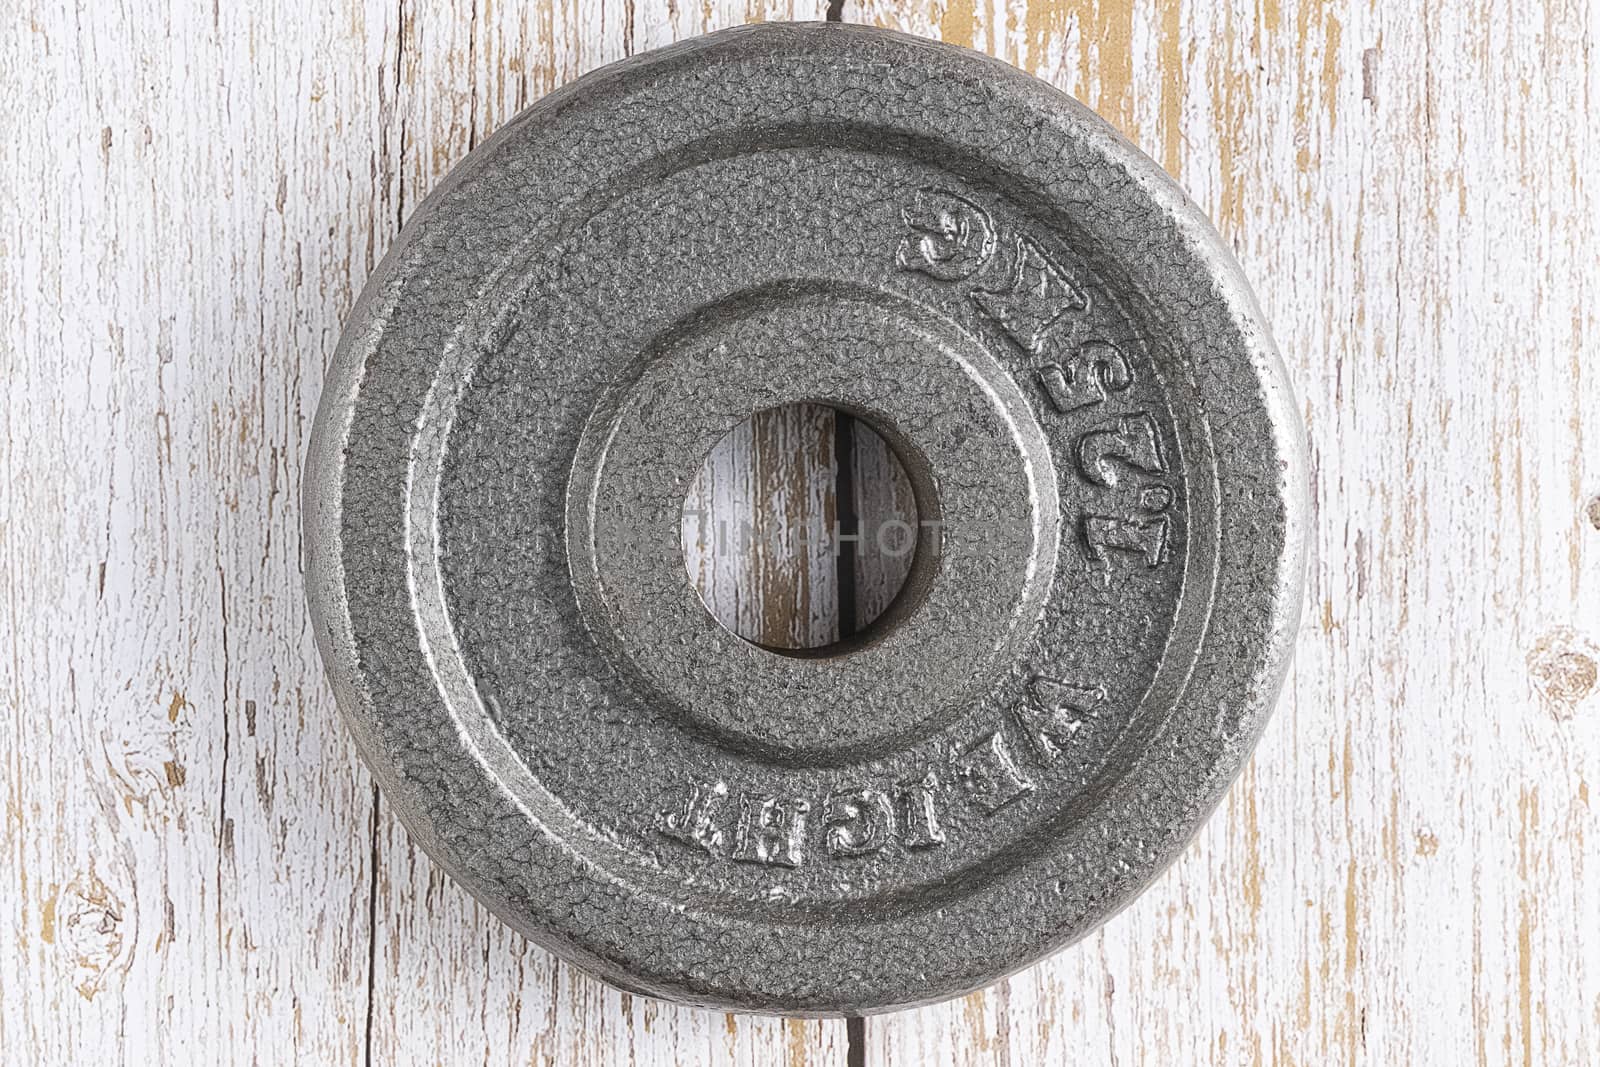 A metal weight plate on brown wooden background